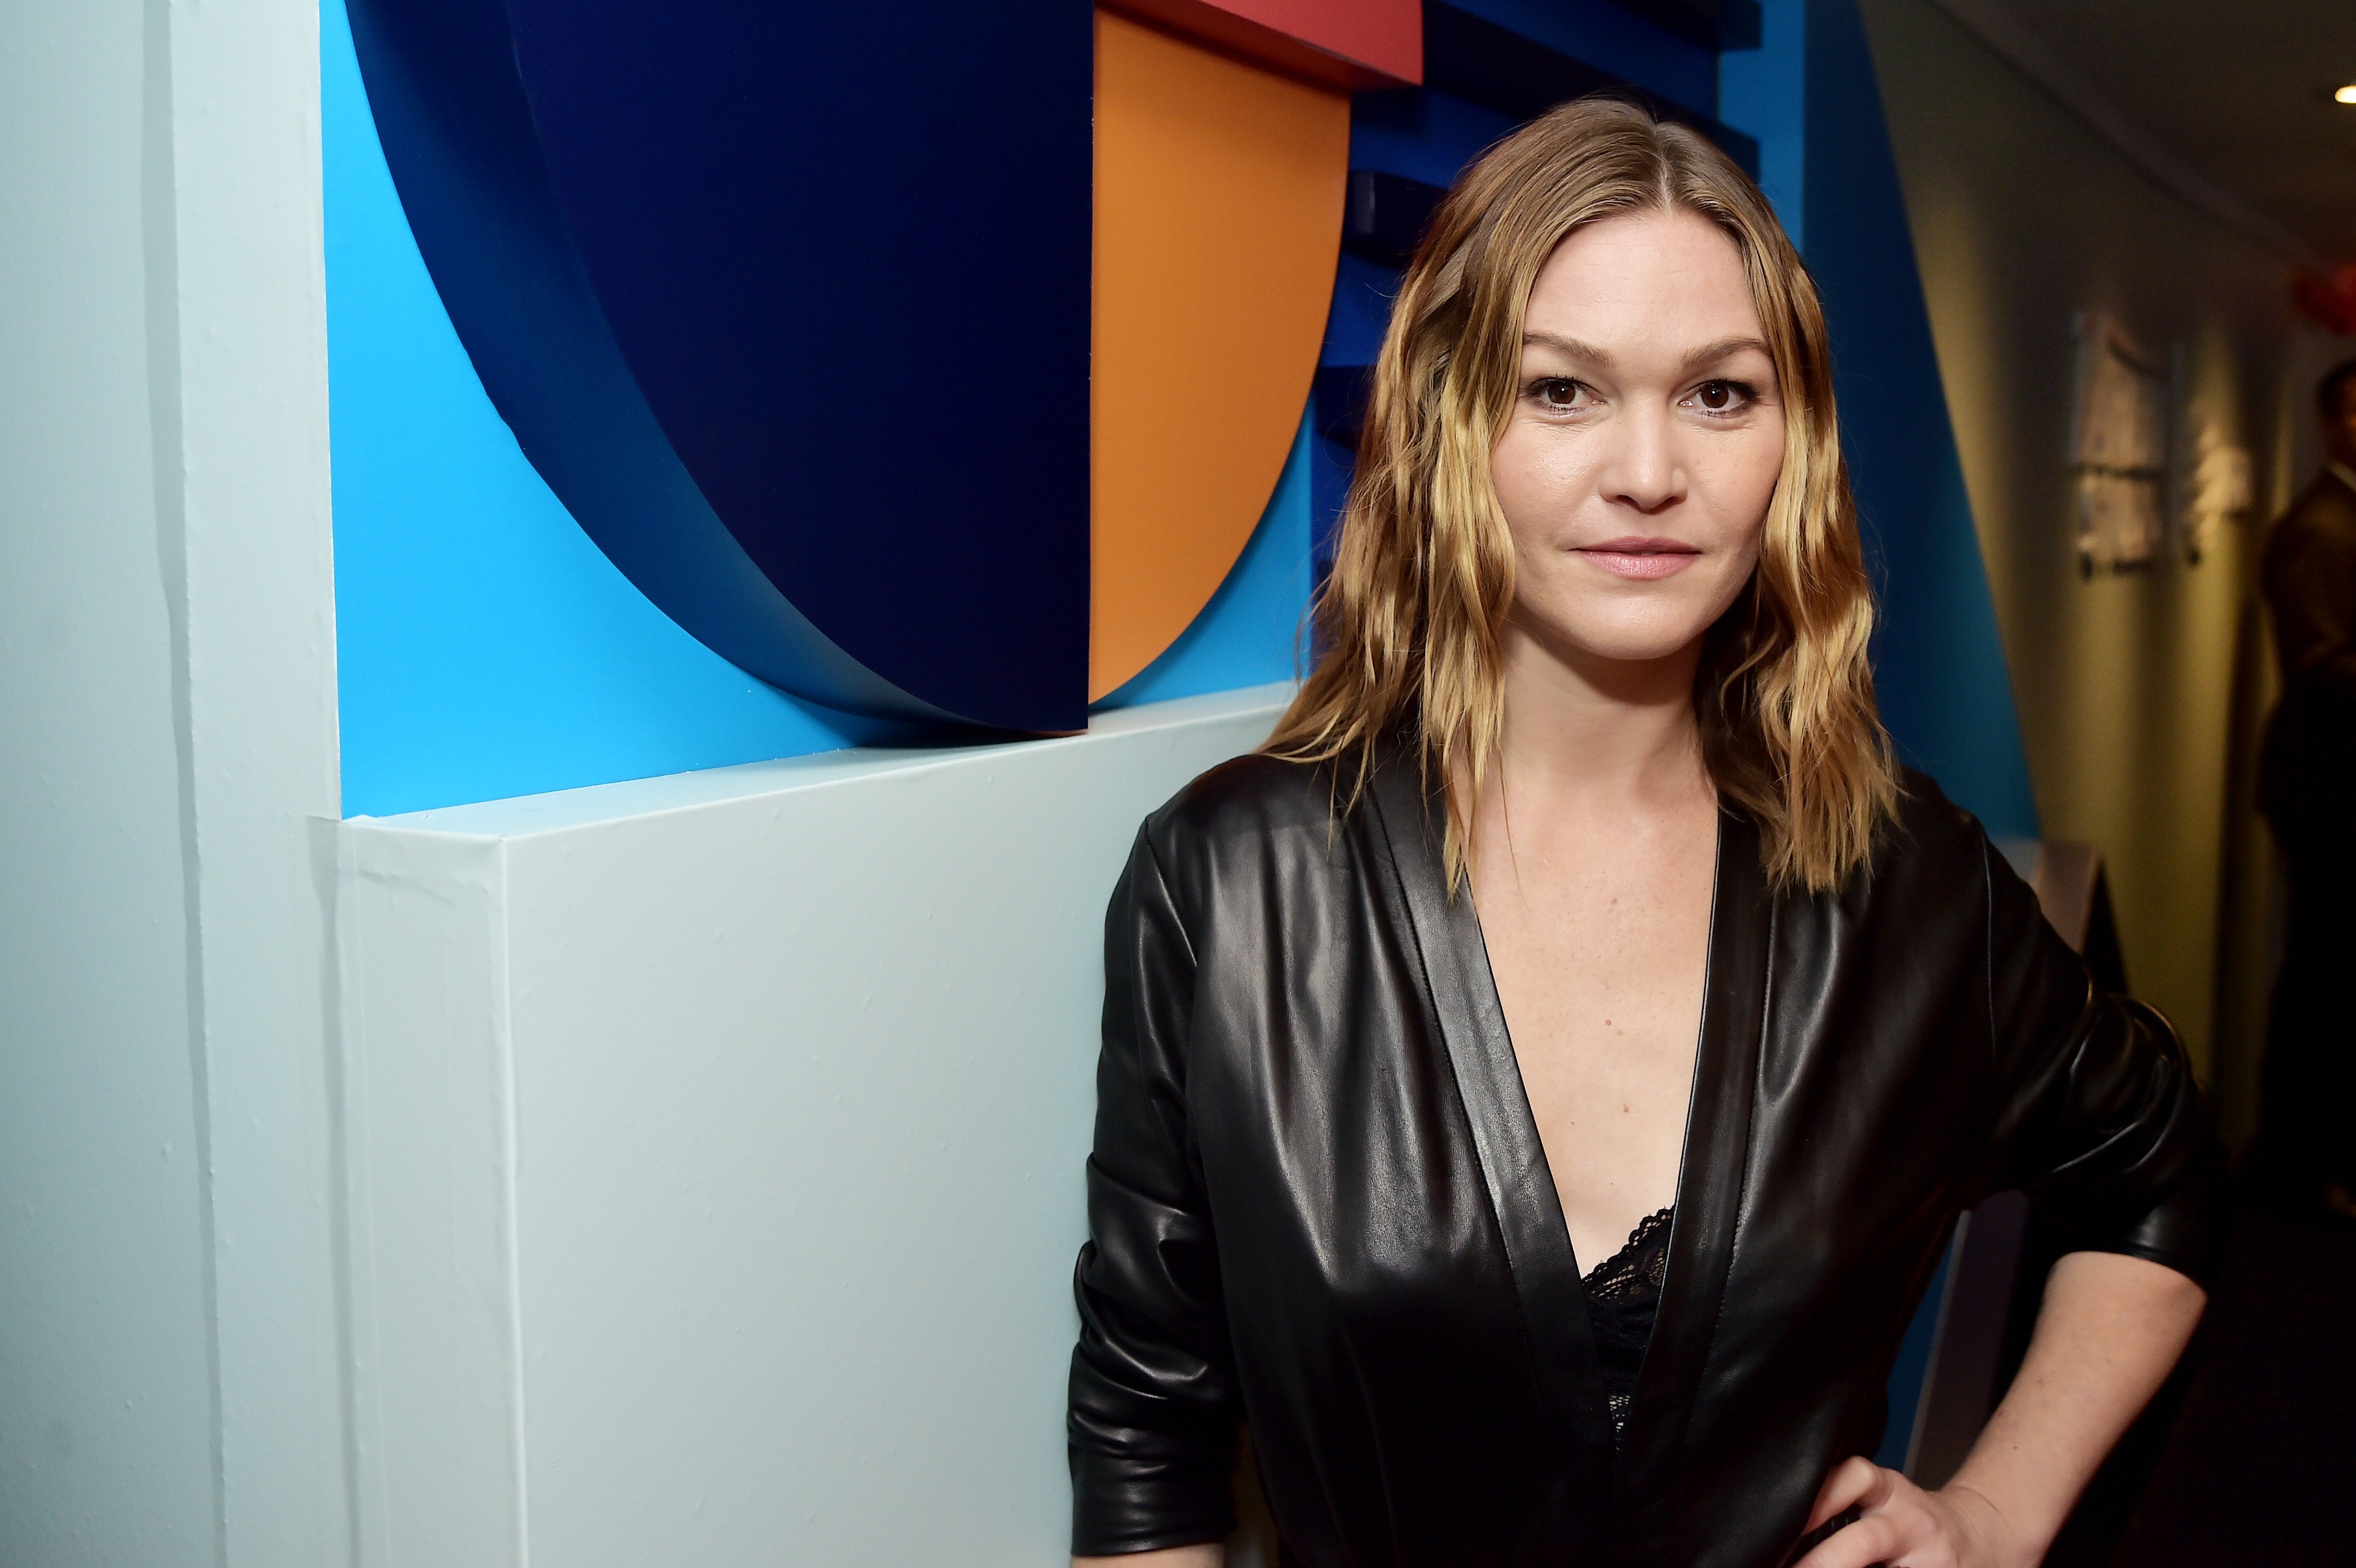 Julia Stiles stops by AT&T during Toronto International Film Festival 2019 on September 08, 2019, in Toronto, Canada. | Source: Getty Images